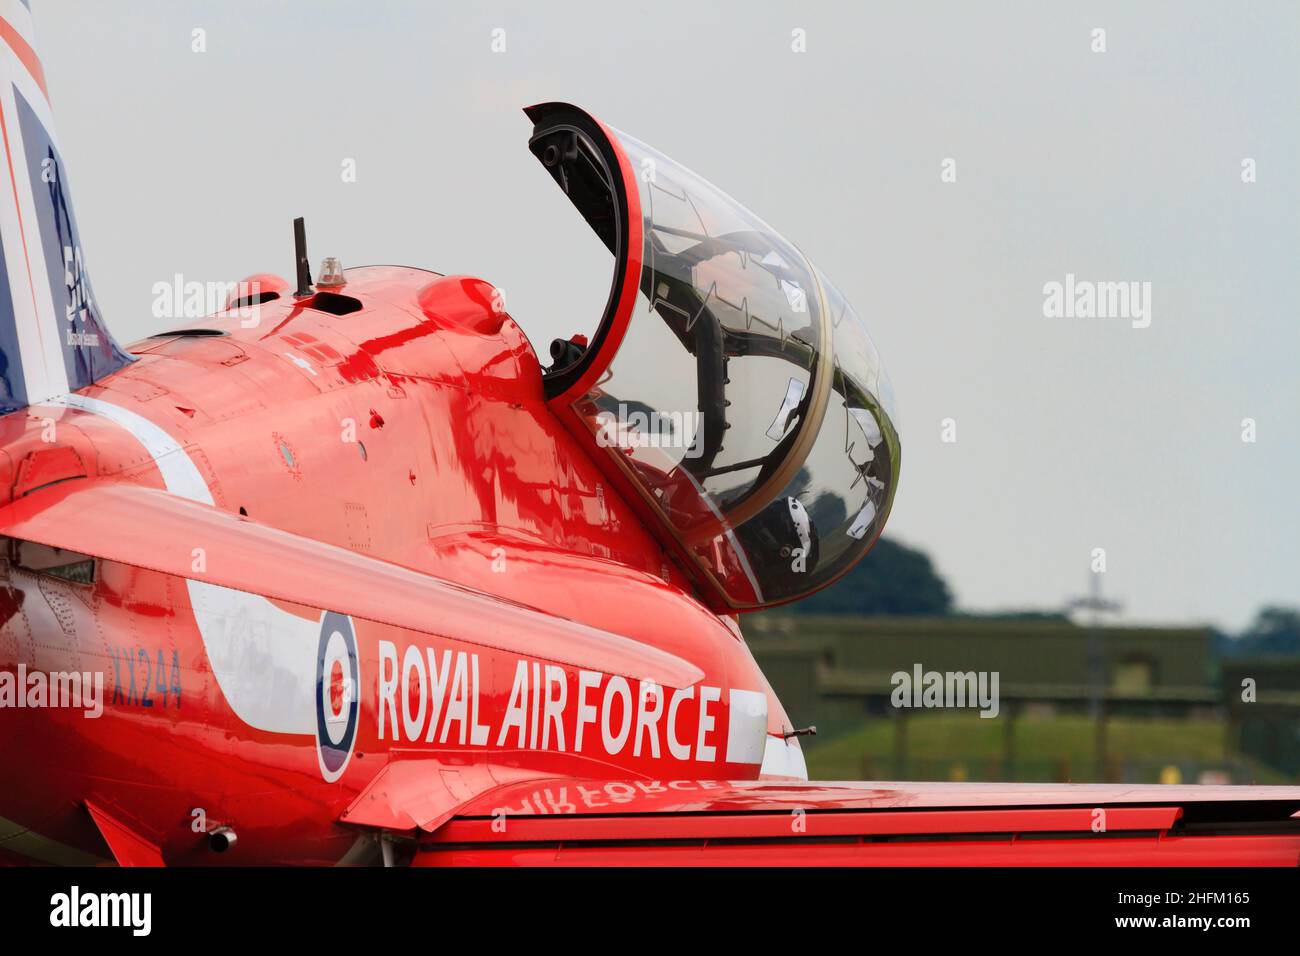 BAE Hawk T1a aircraft of the Royal Air Force aerobatic display team, The Red Arrows, with the 50th Anniversity tail markings. On the ground with the c Stock Photo